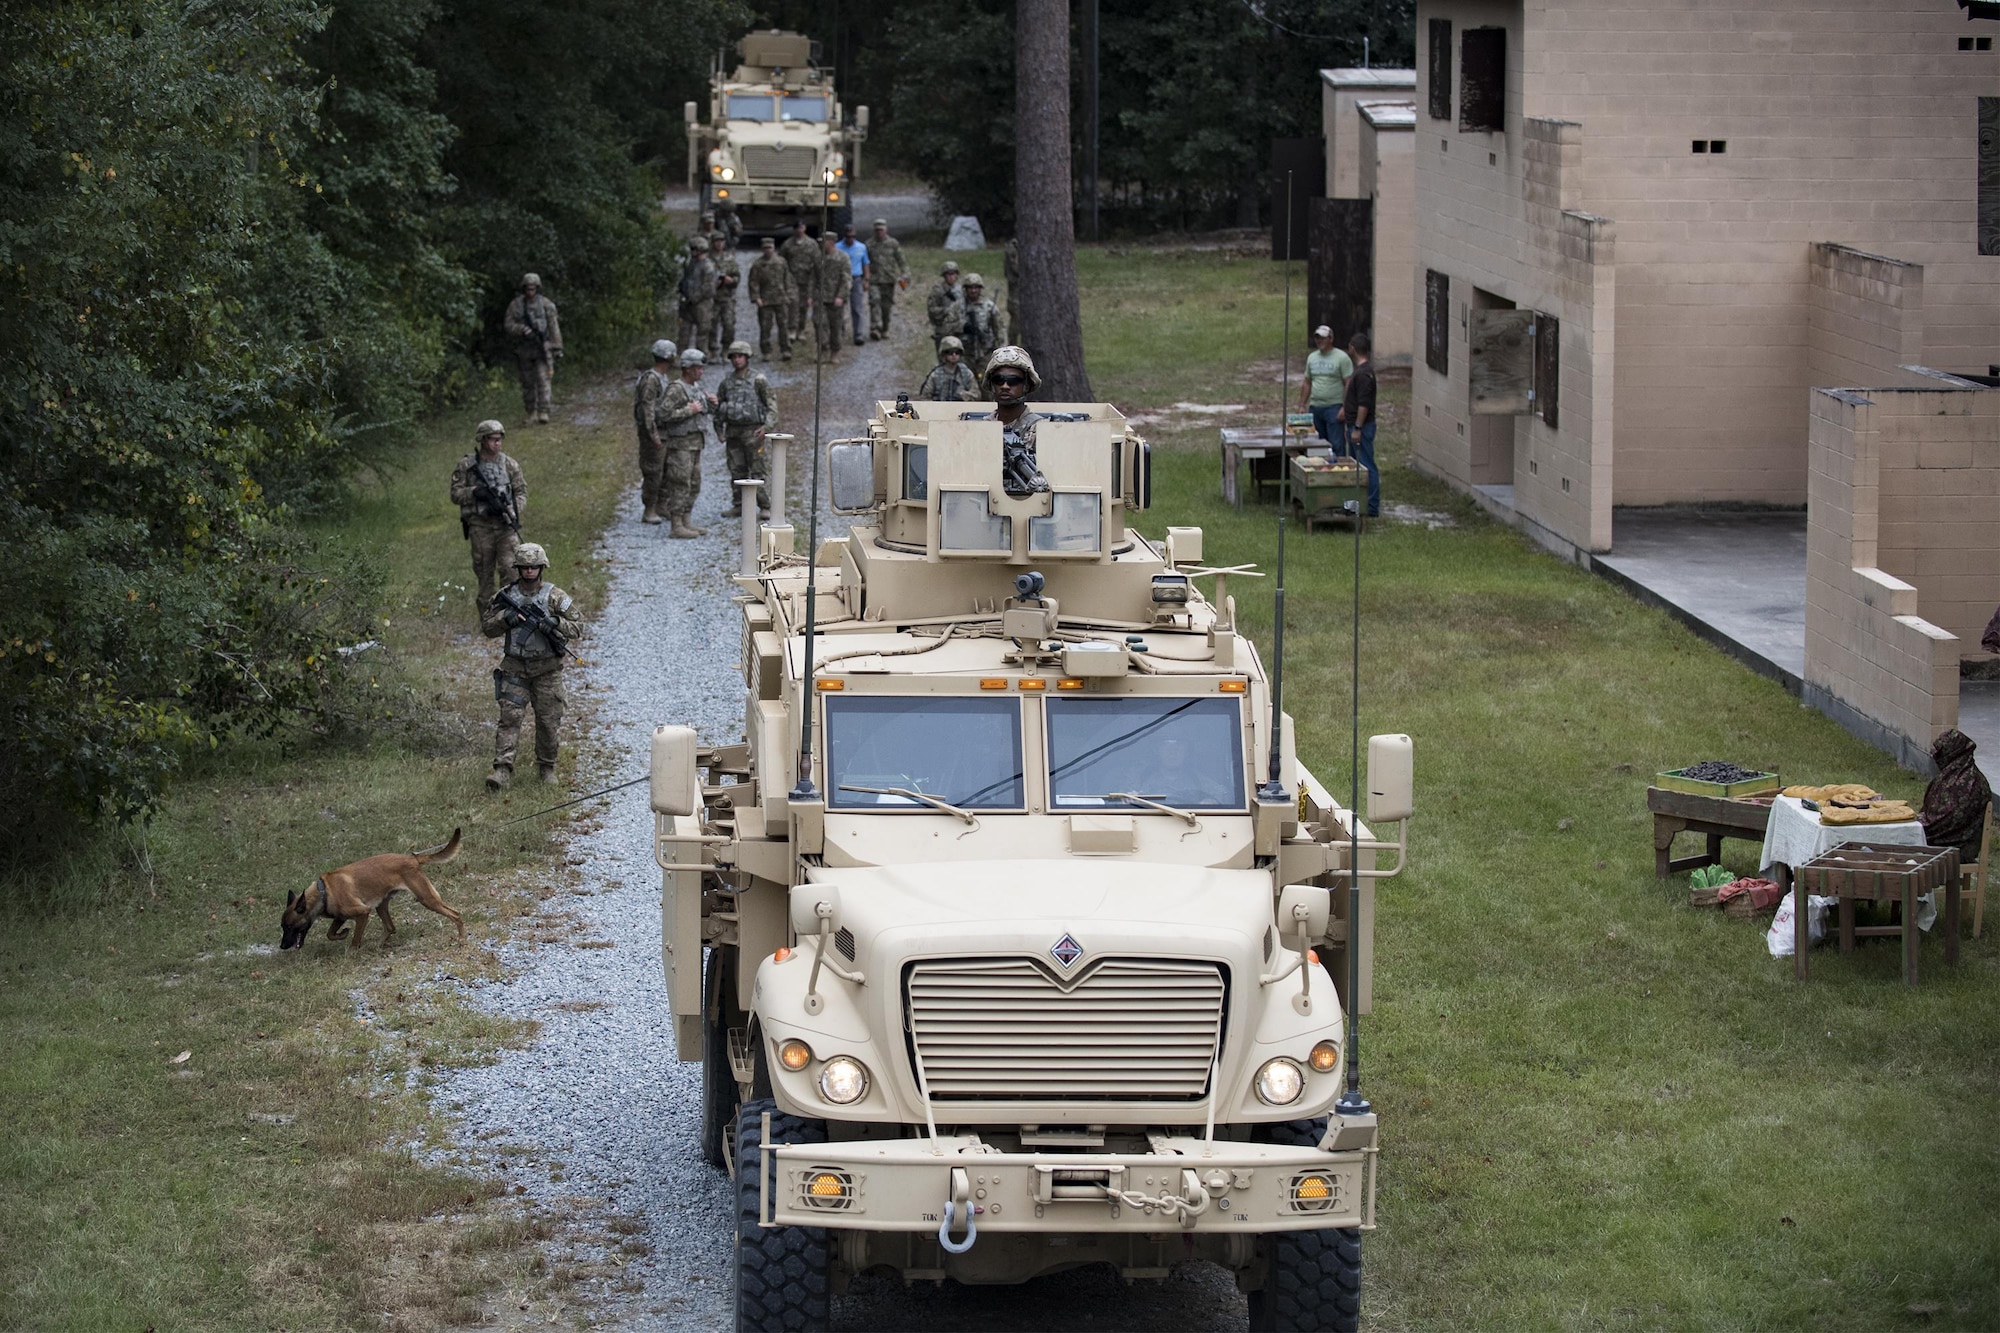 A convoy of U.S. Air Force Airmen from the 820th Base Defense Group and mine-resistant, ambush protected vehicles patrol a road Oct. 6, 2016, at Moody Air Force Base, Ga. The 820th BDG simulated a deployed environment at the military operations in an urban terrain village showcasing a variety of capabilities to include detecting improvised explosive devices and securing hostile areas during Maj. Gen. Scott Zobrist's, 9th Air Force commander, first official visit to the 93rd Air Ground Operations Wing since taking command in May 2016. He was accompanied by Chief Master Sgt. Frank H. Batten III, 9th Air Force command chief. (U.S. Air Force photo by Airman 1st Class Daniel Snider)